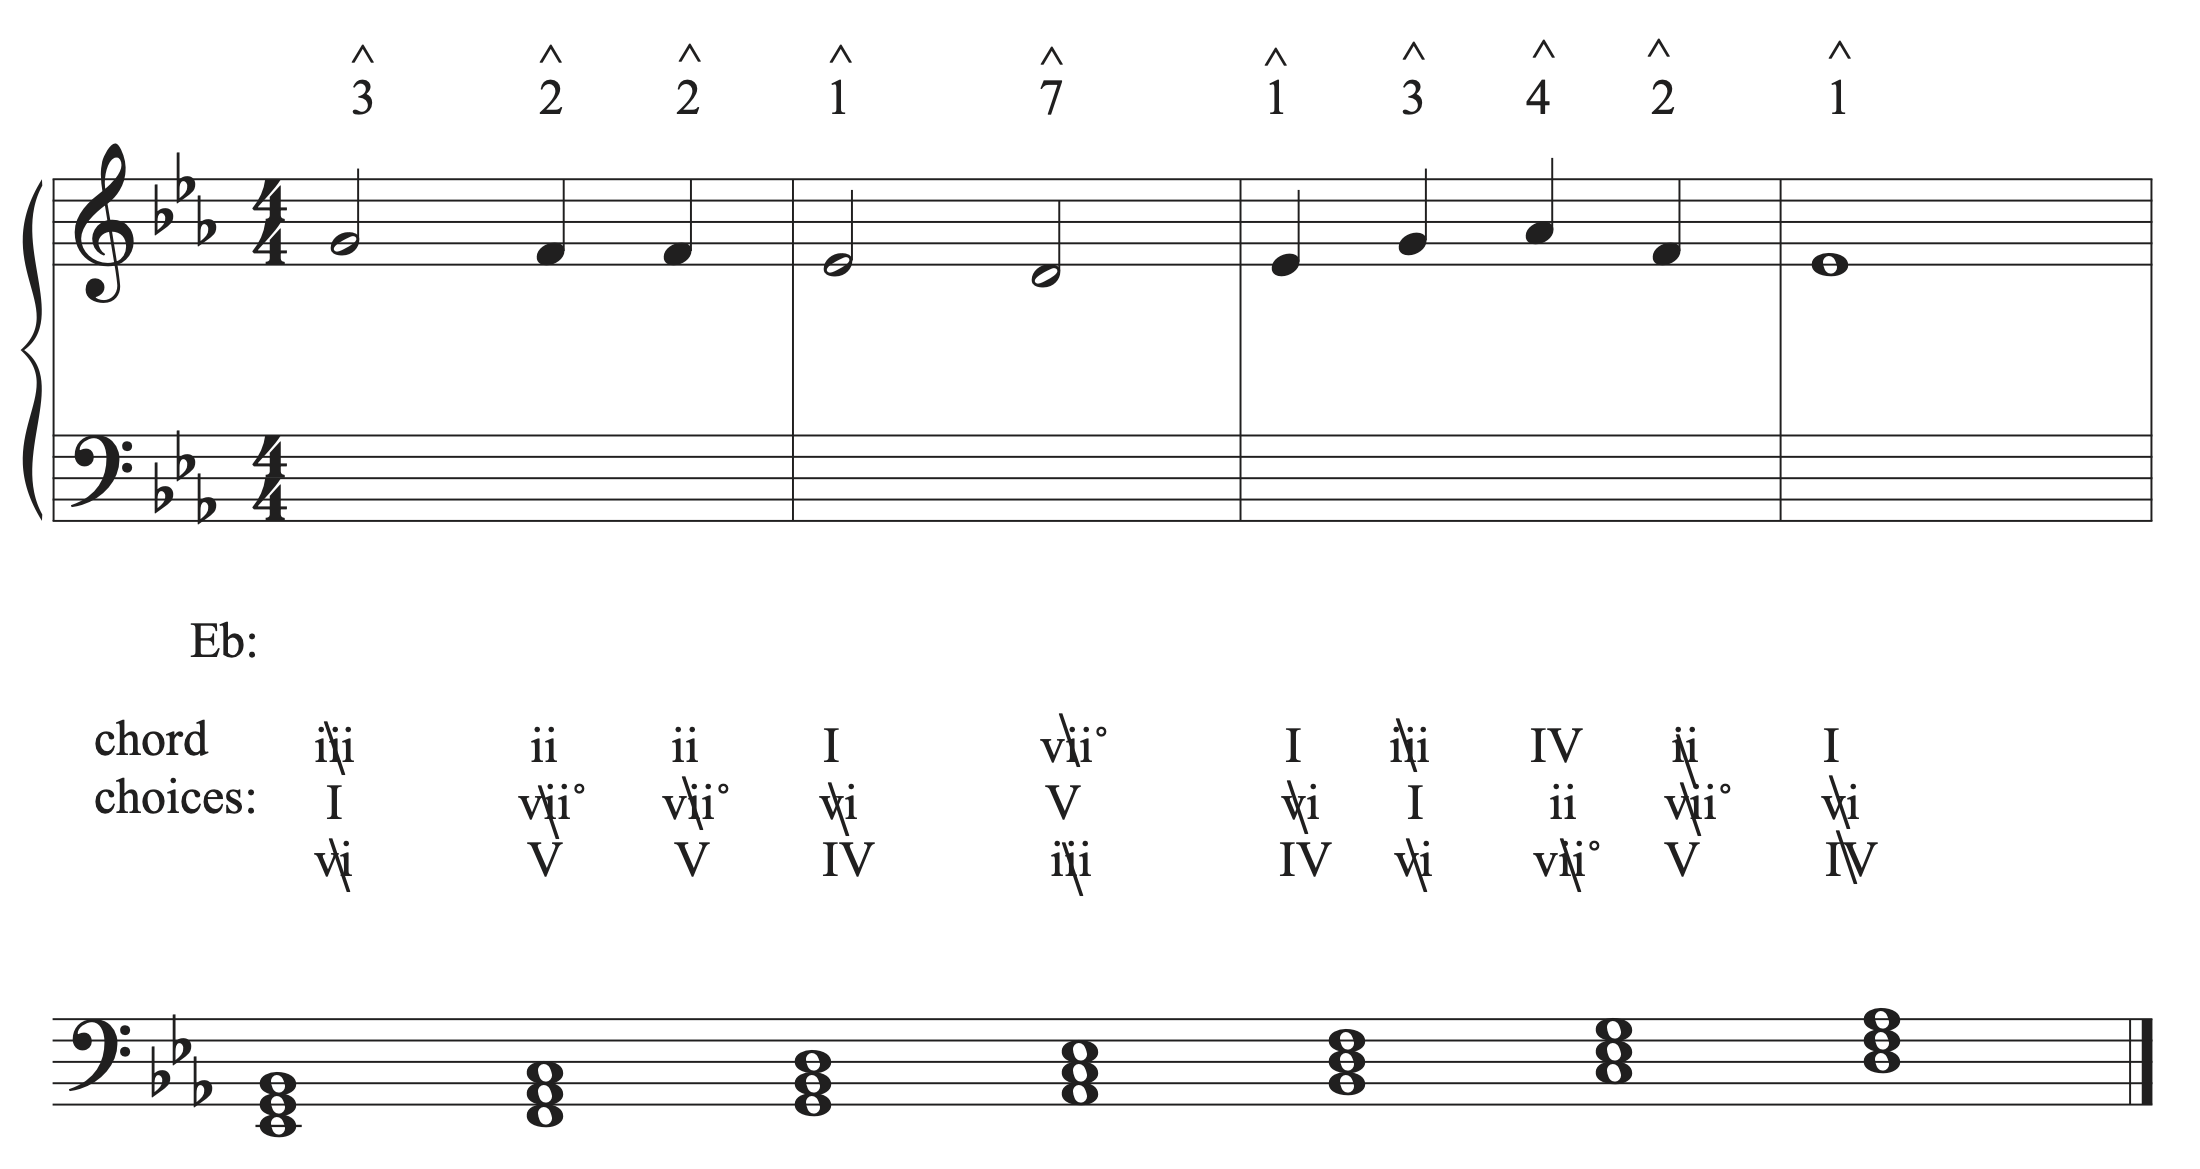 The musical example in E-flat major with more chord choices eliminated.